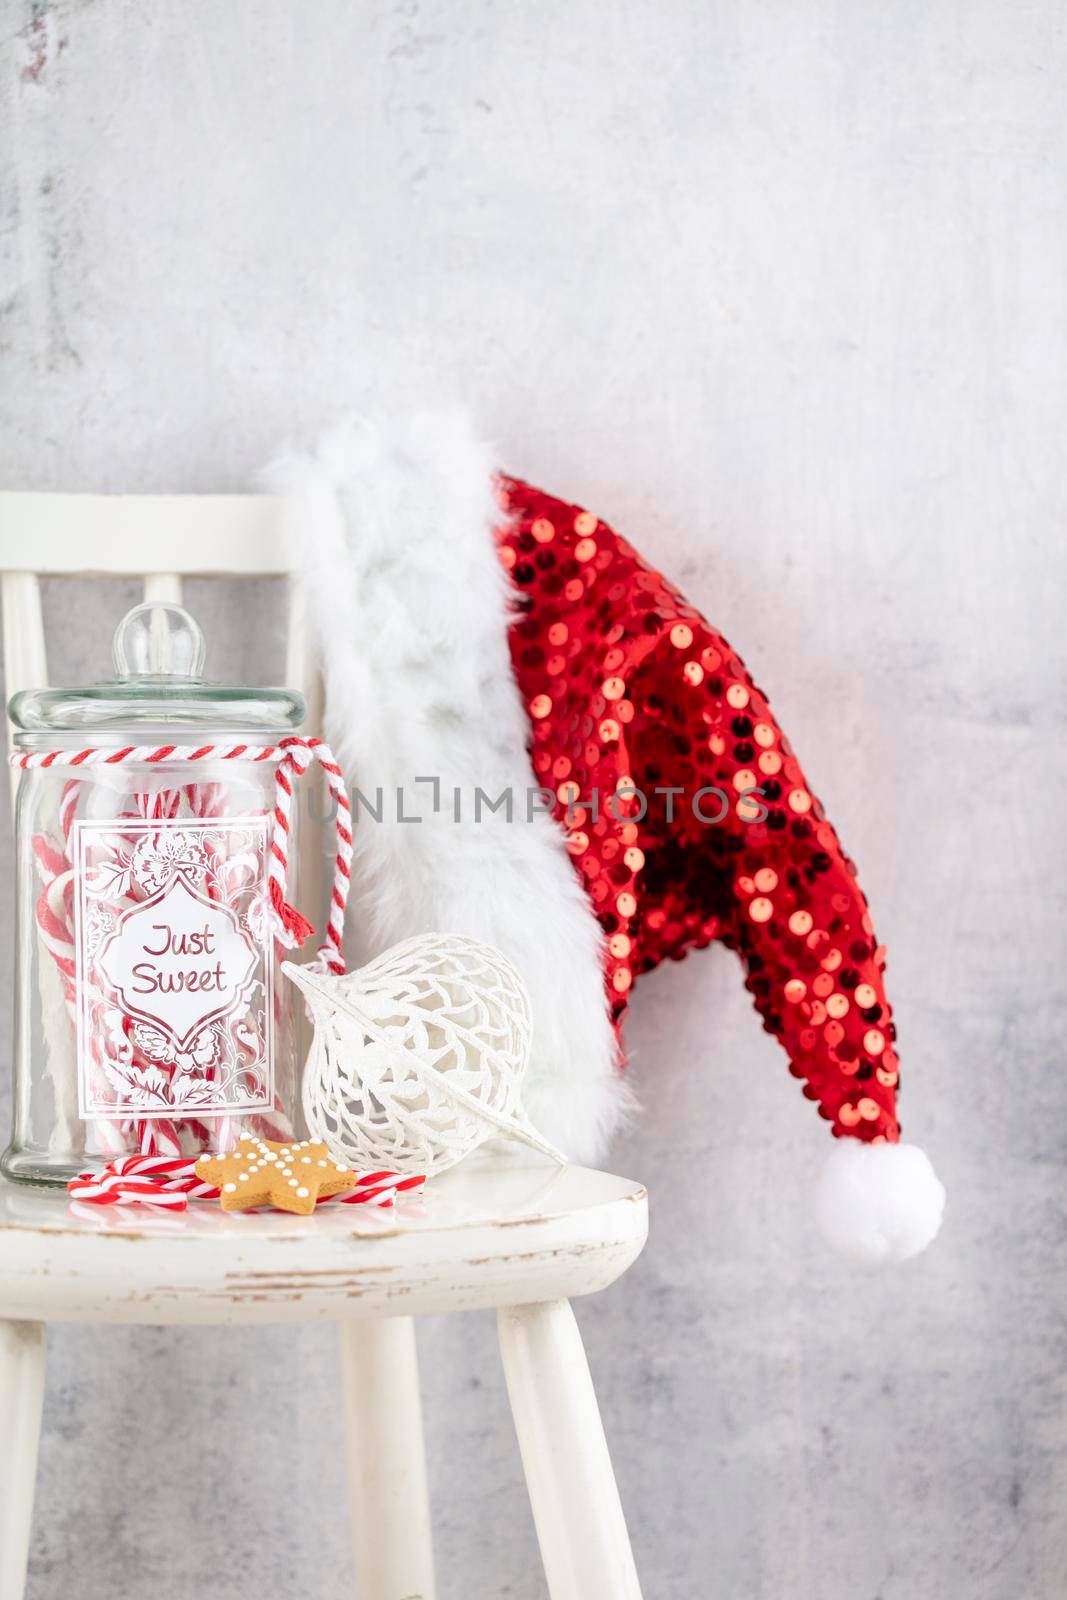 Cozy scandinavian family home on a Christmas eve. Xmas Concept, Decoration Over Grunge Background.